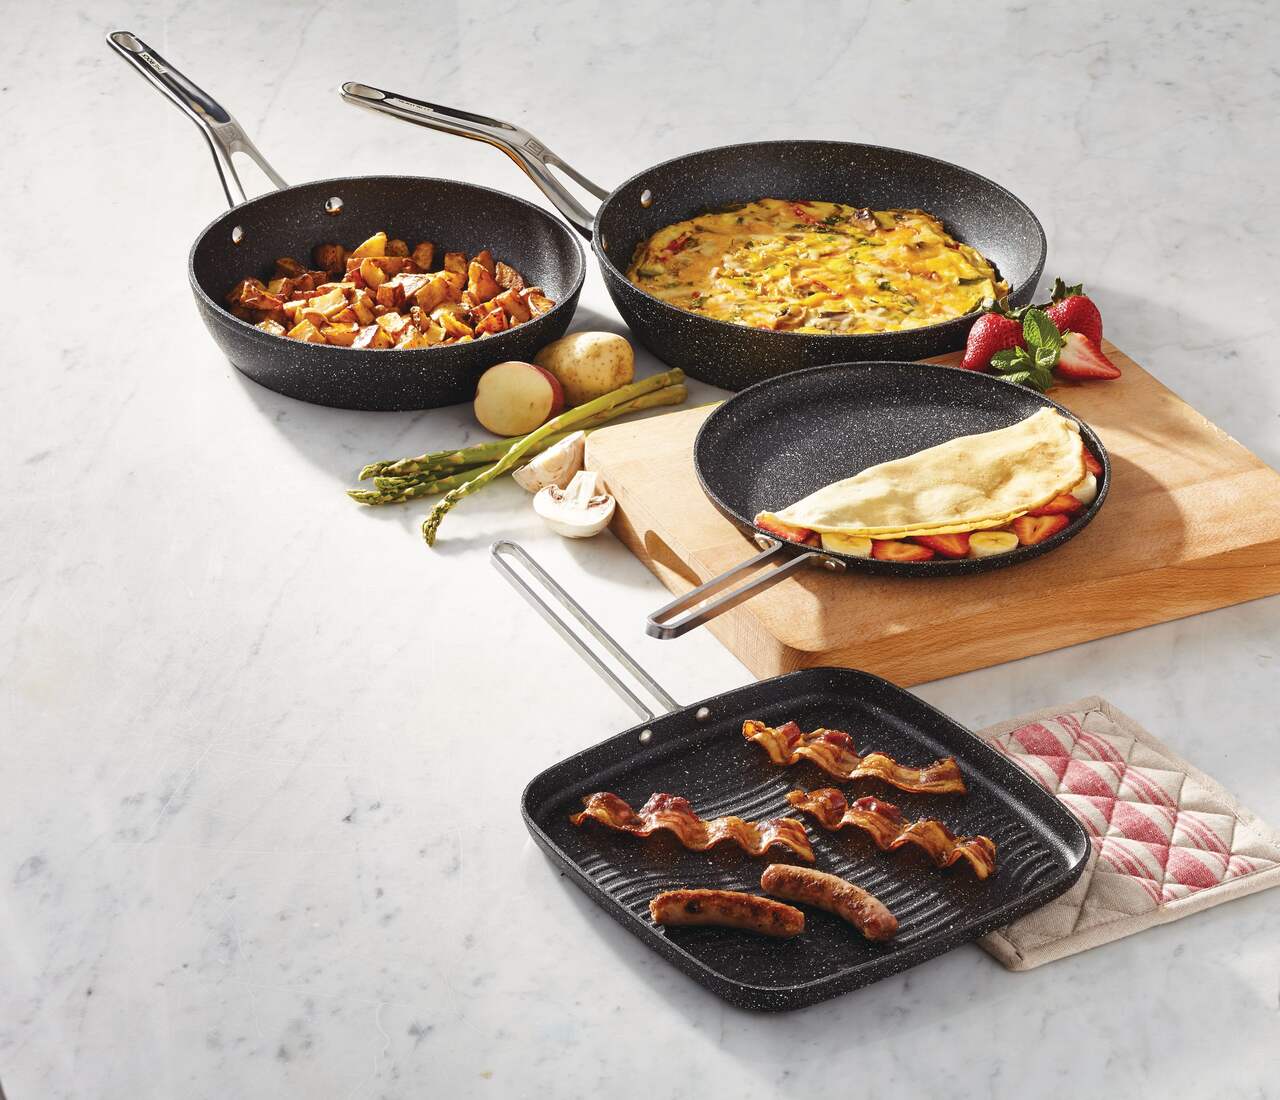 https://media-www.canadiantire.ca/product/living/kitchen/cookware/1427072/heritage-rock-26cm-non-stick-frypan-e61d0712-5077-43dc-a346-58d14b3df0e4-jpgrendition.jpg?imdensity=1&imwidth=1244&impolicy=mZoom